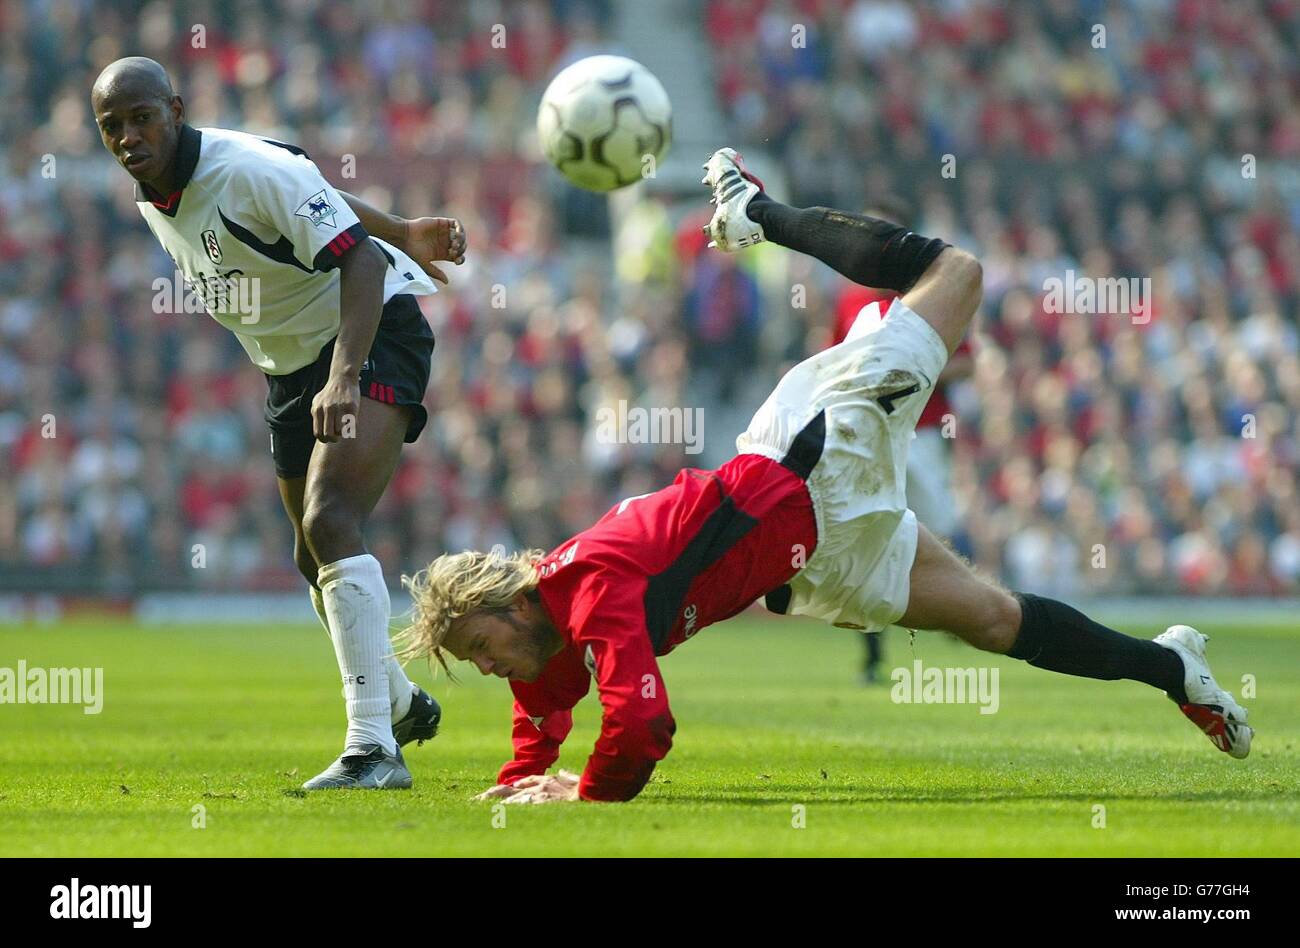 Manchester United's David Beckham falls over from a challenge from Fulham's Luis Boa Morte (left) during the Barclaycard Premiership match at Old Trafford, Manchester. Stock Photo